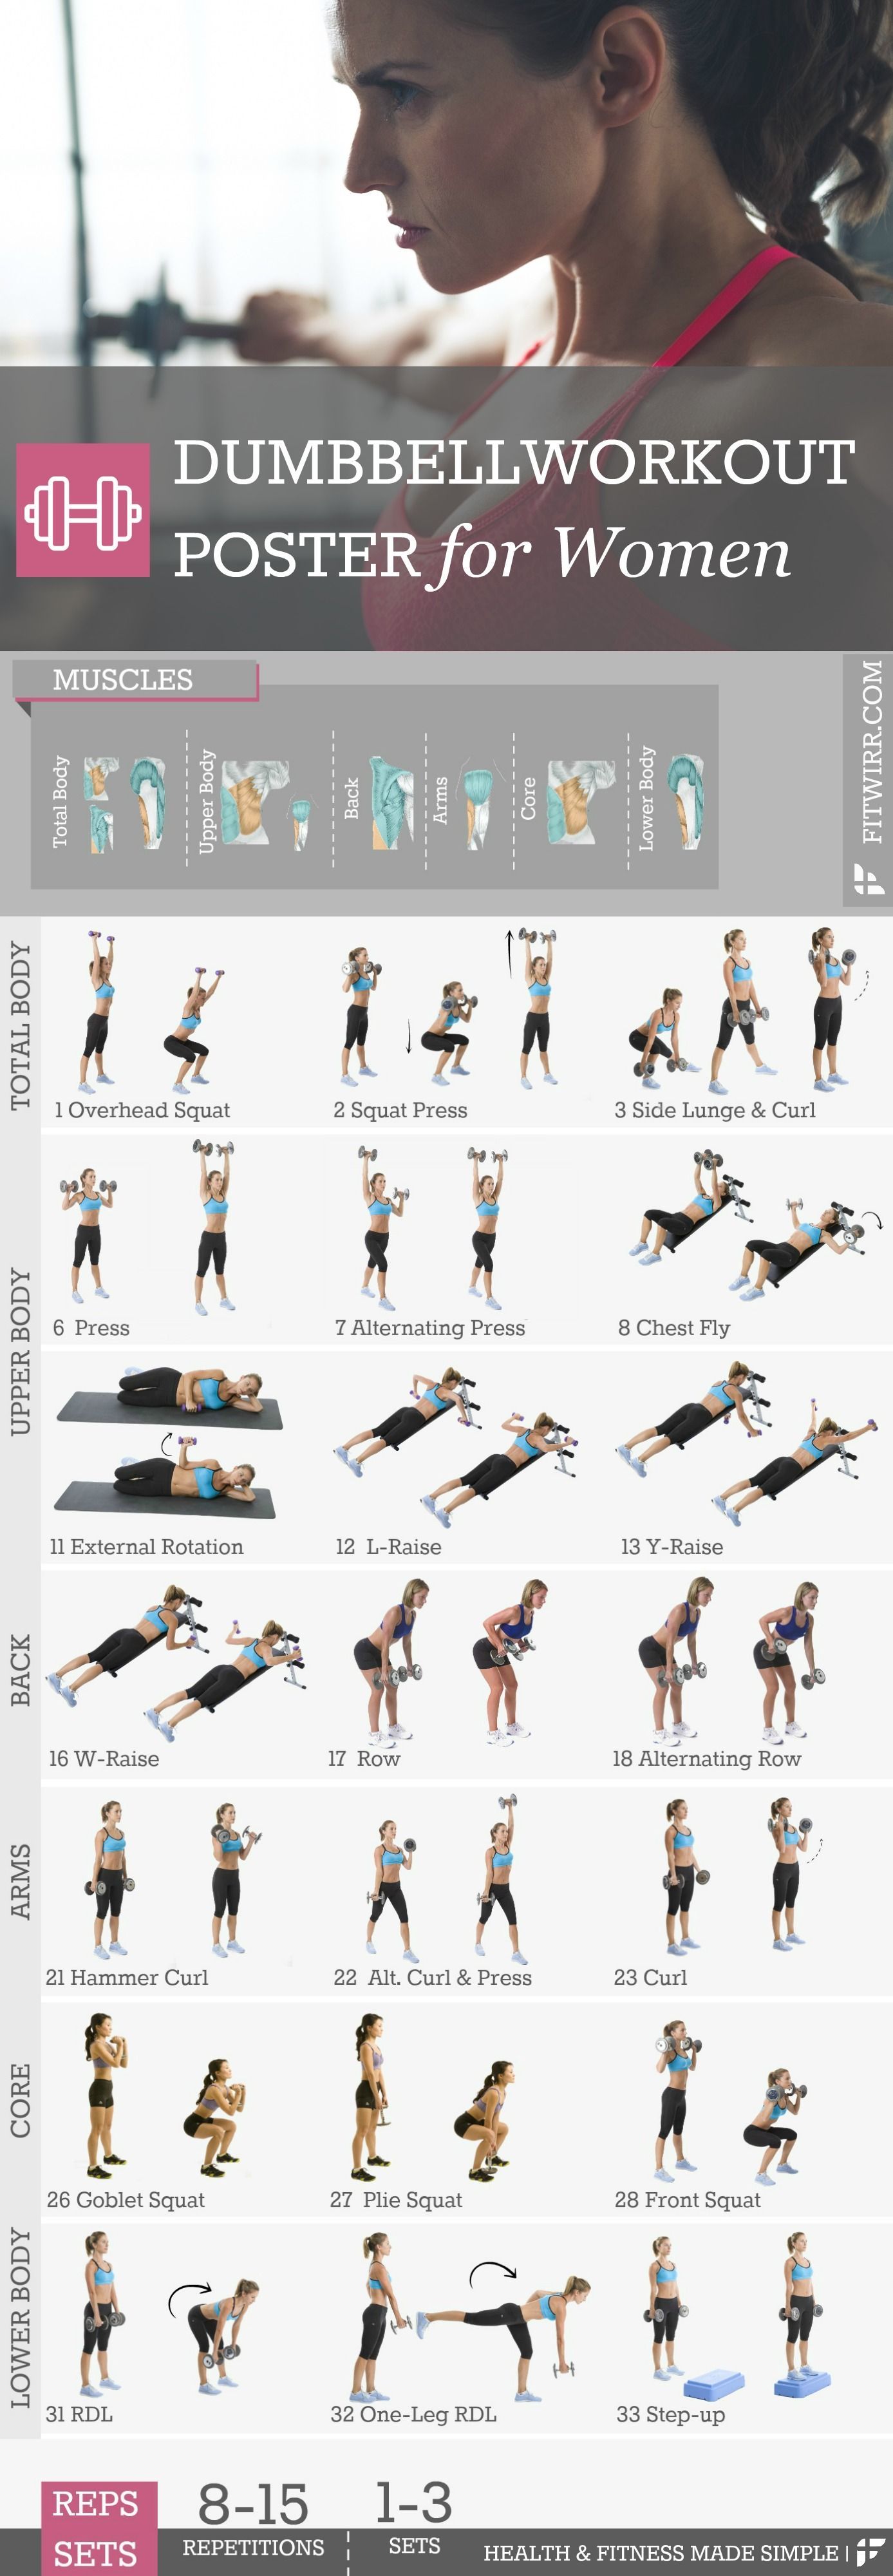 Want tight and toned abs, sculpted arms and shoulders, and hot-in-heels-legs? Discover the best dumbbell exercises recommended by